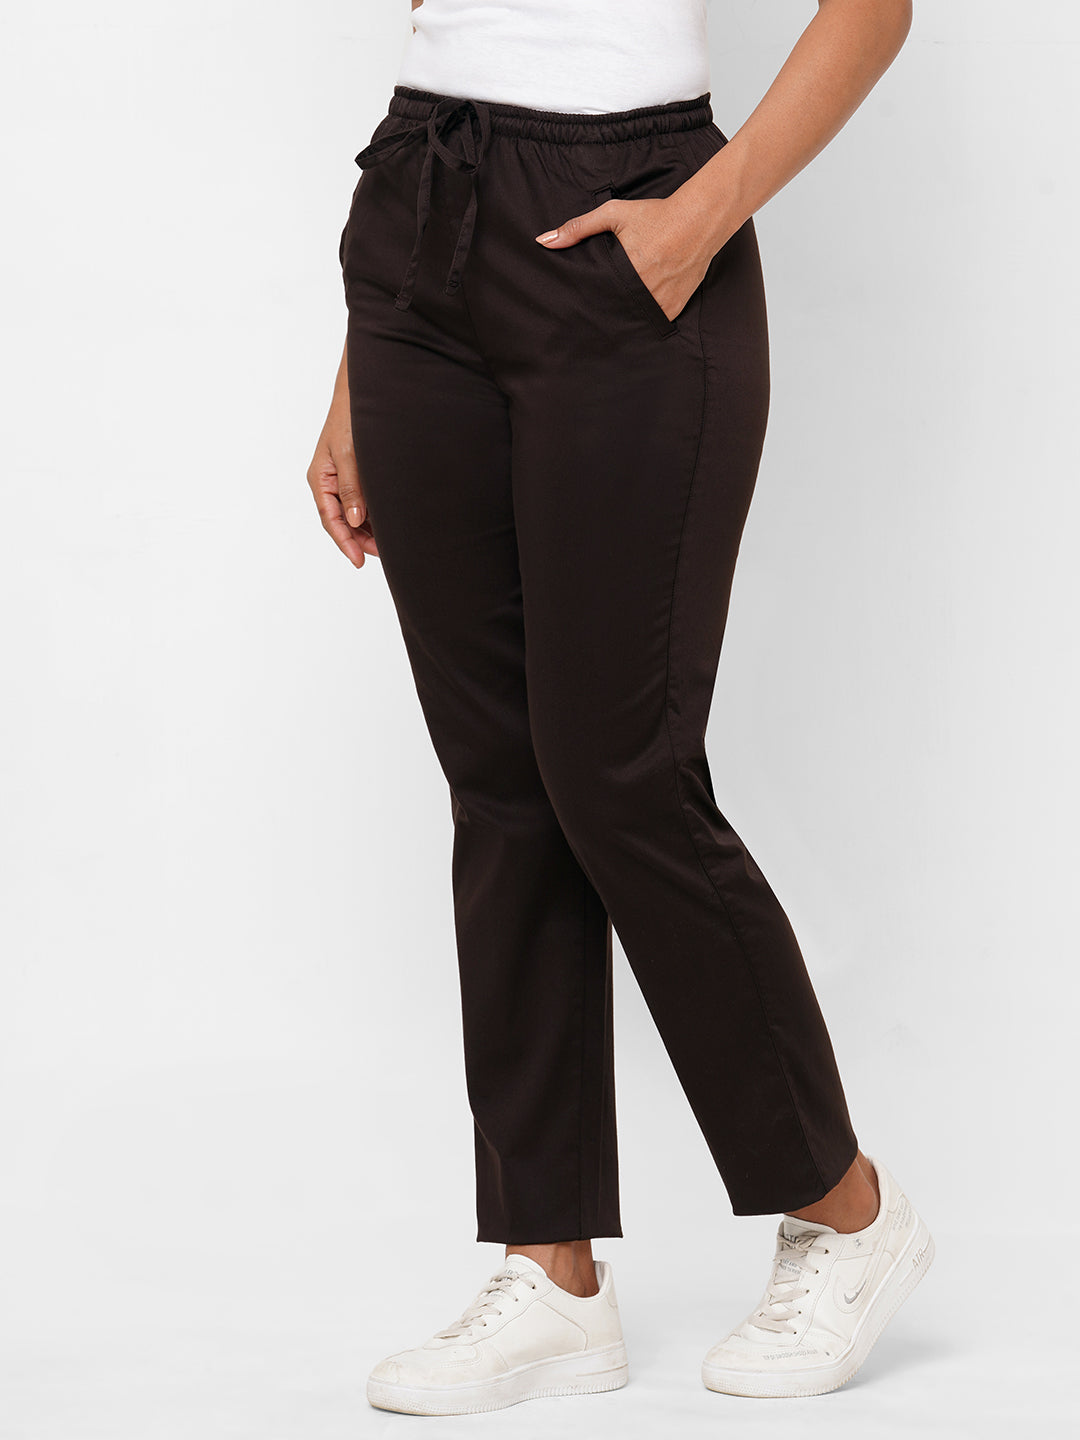 Brooklyn - Brown Cotton Lycra Trousers TR19008 – Uathayam